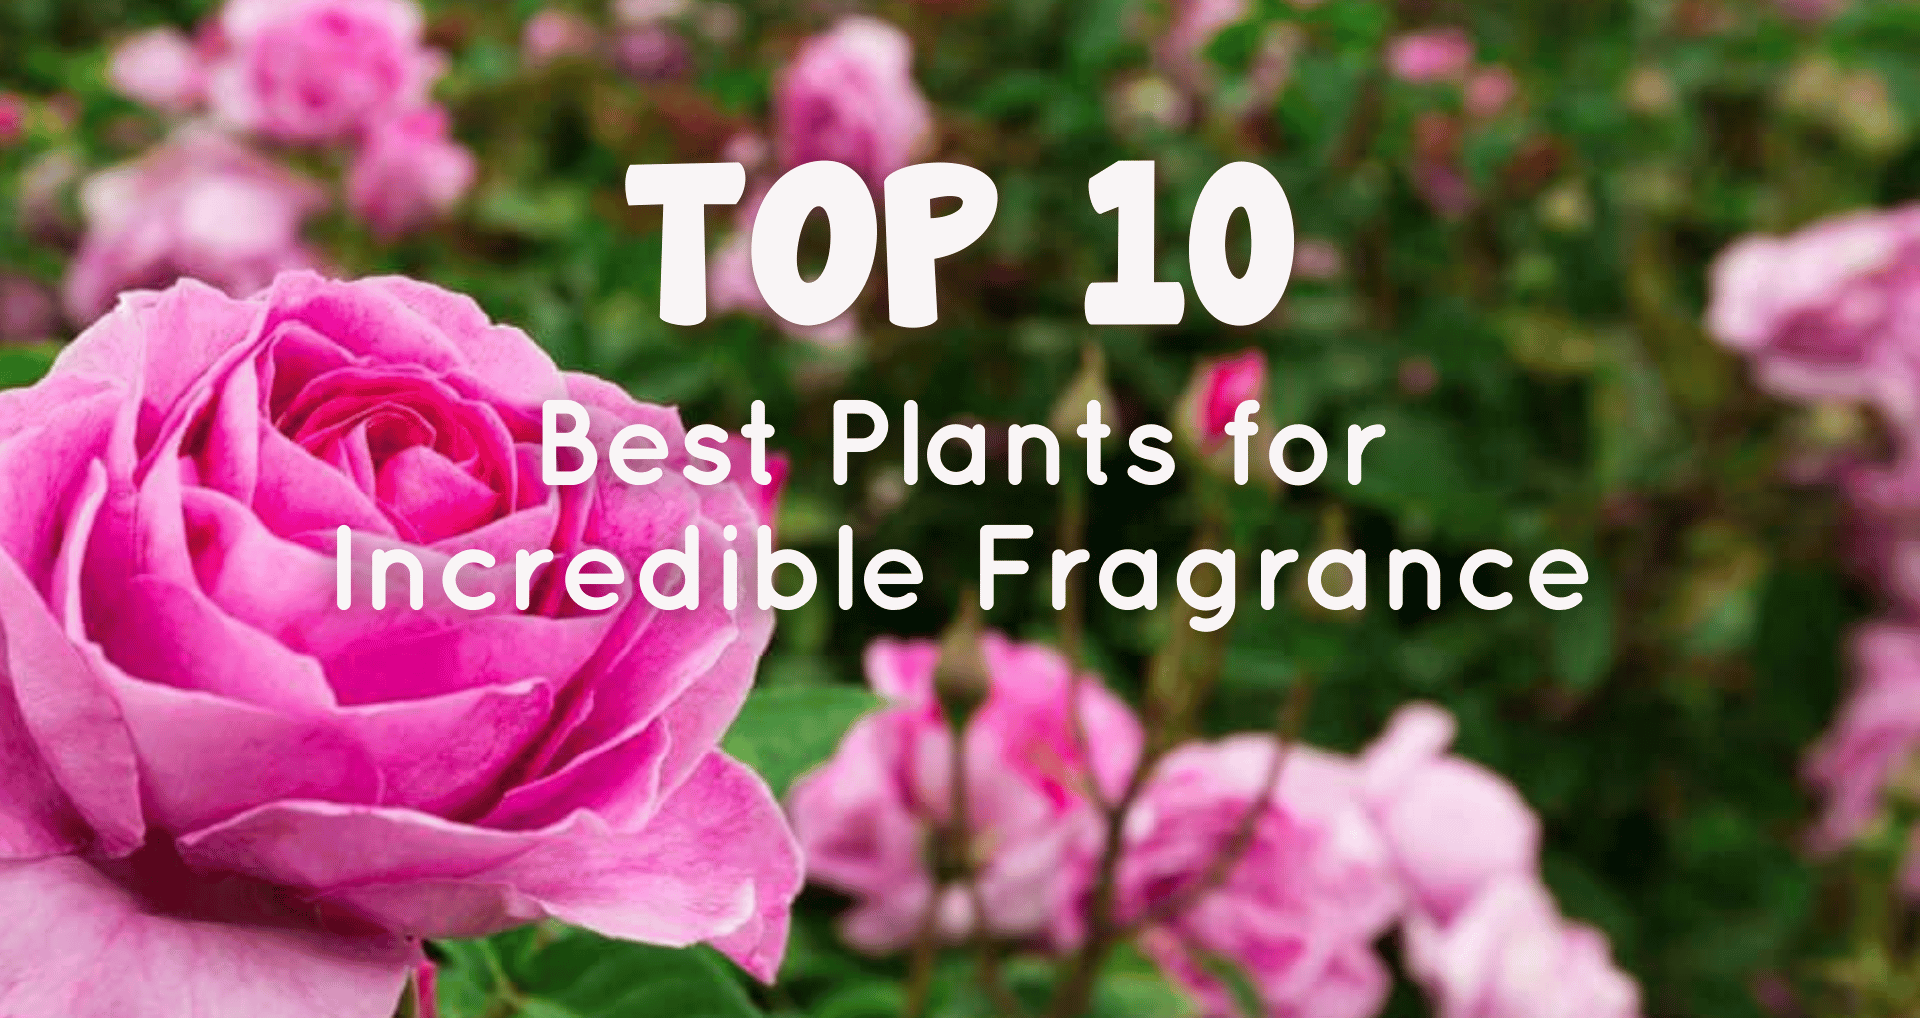 Top 10 best indoor plants for incredible fragrance" text over a background of blooming pink roses.